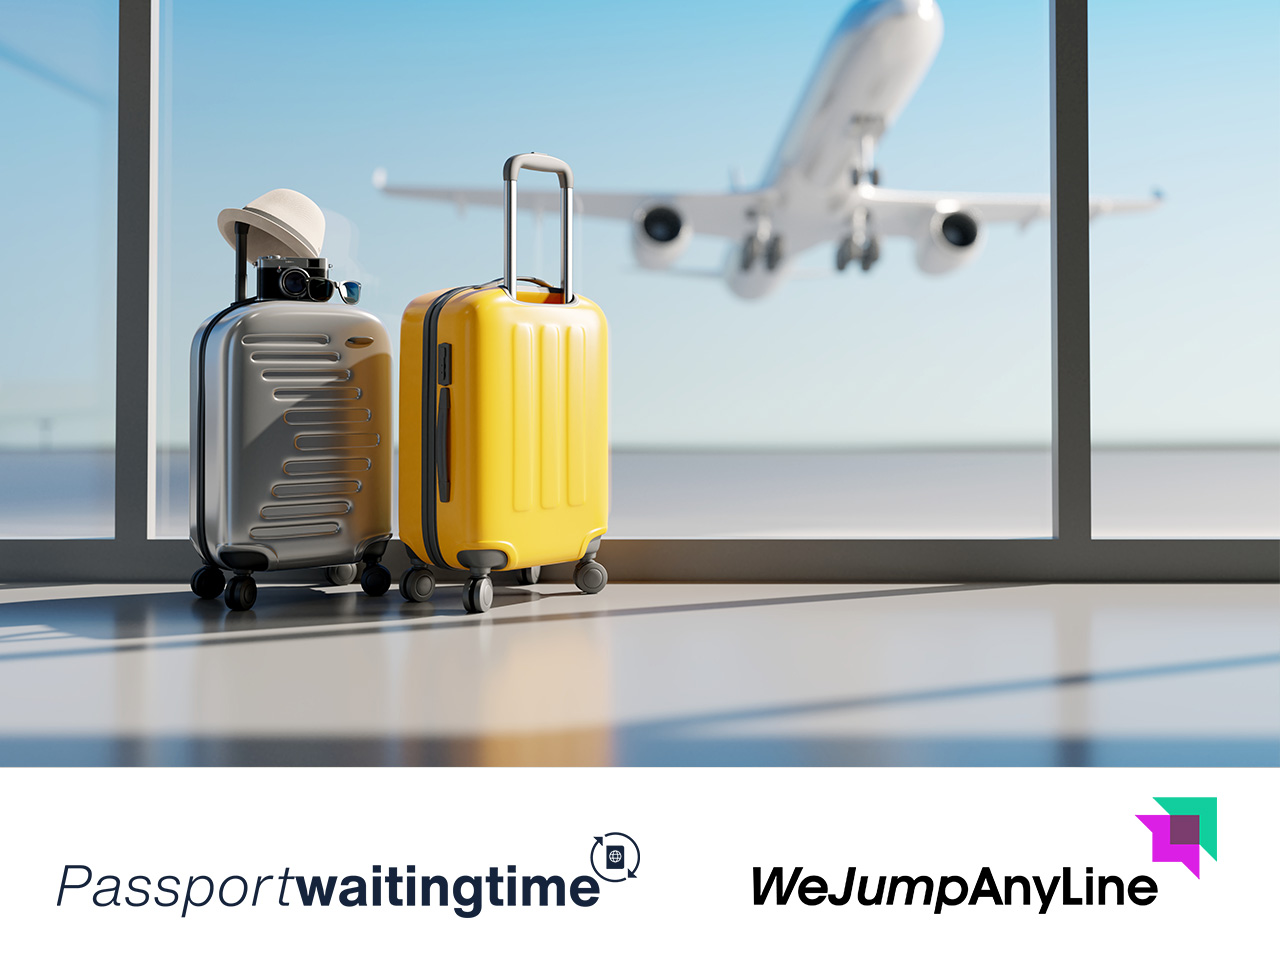 Passport Waiting Time acquires We Jump Any Line to offer customers 'more seamless travel experience'